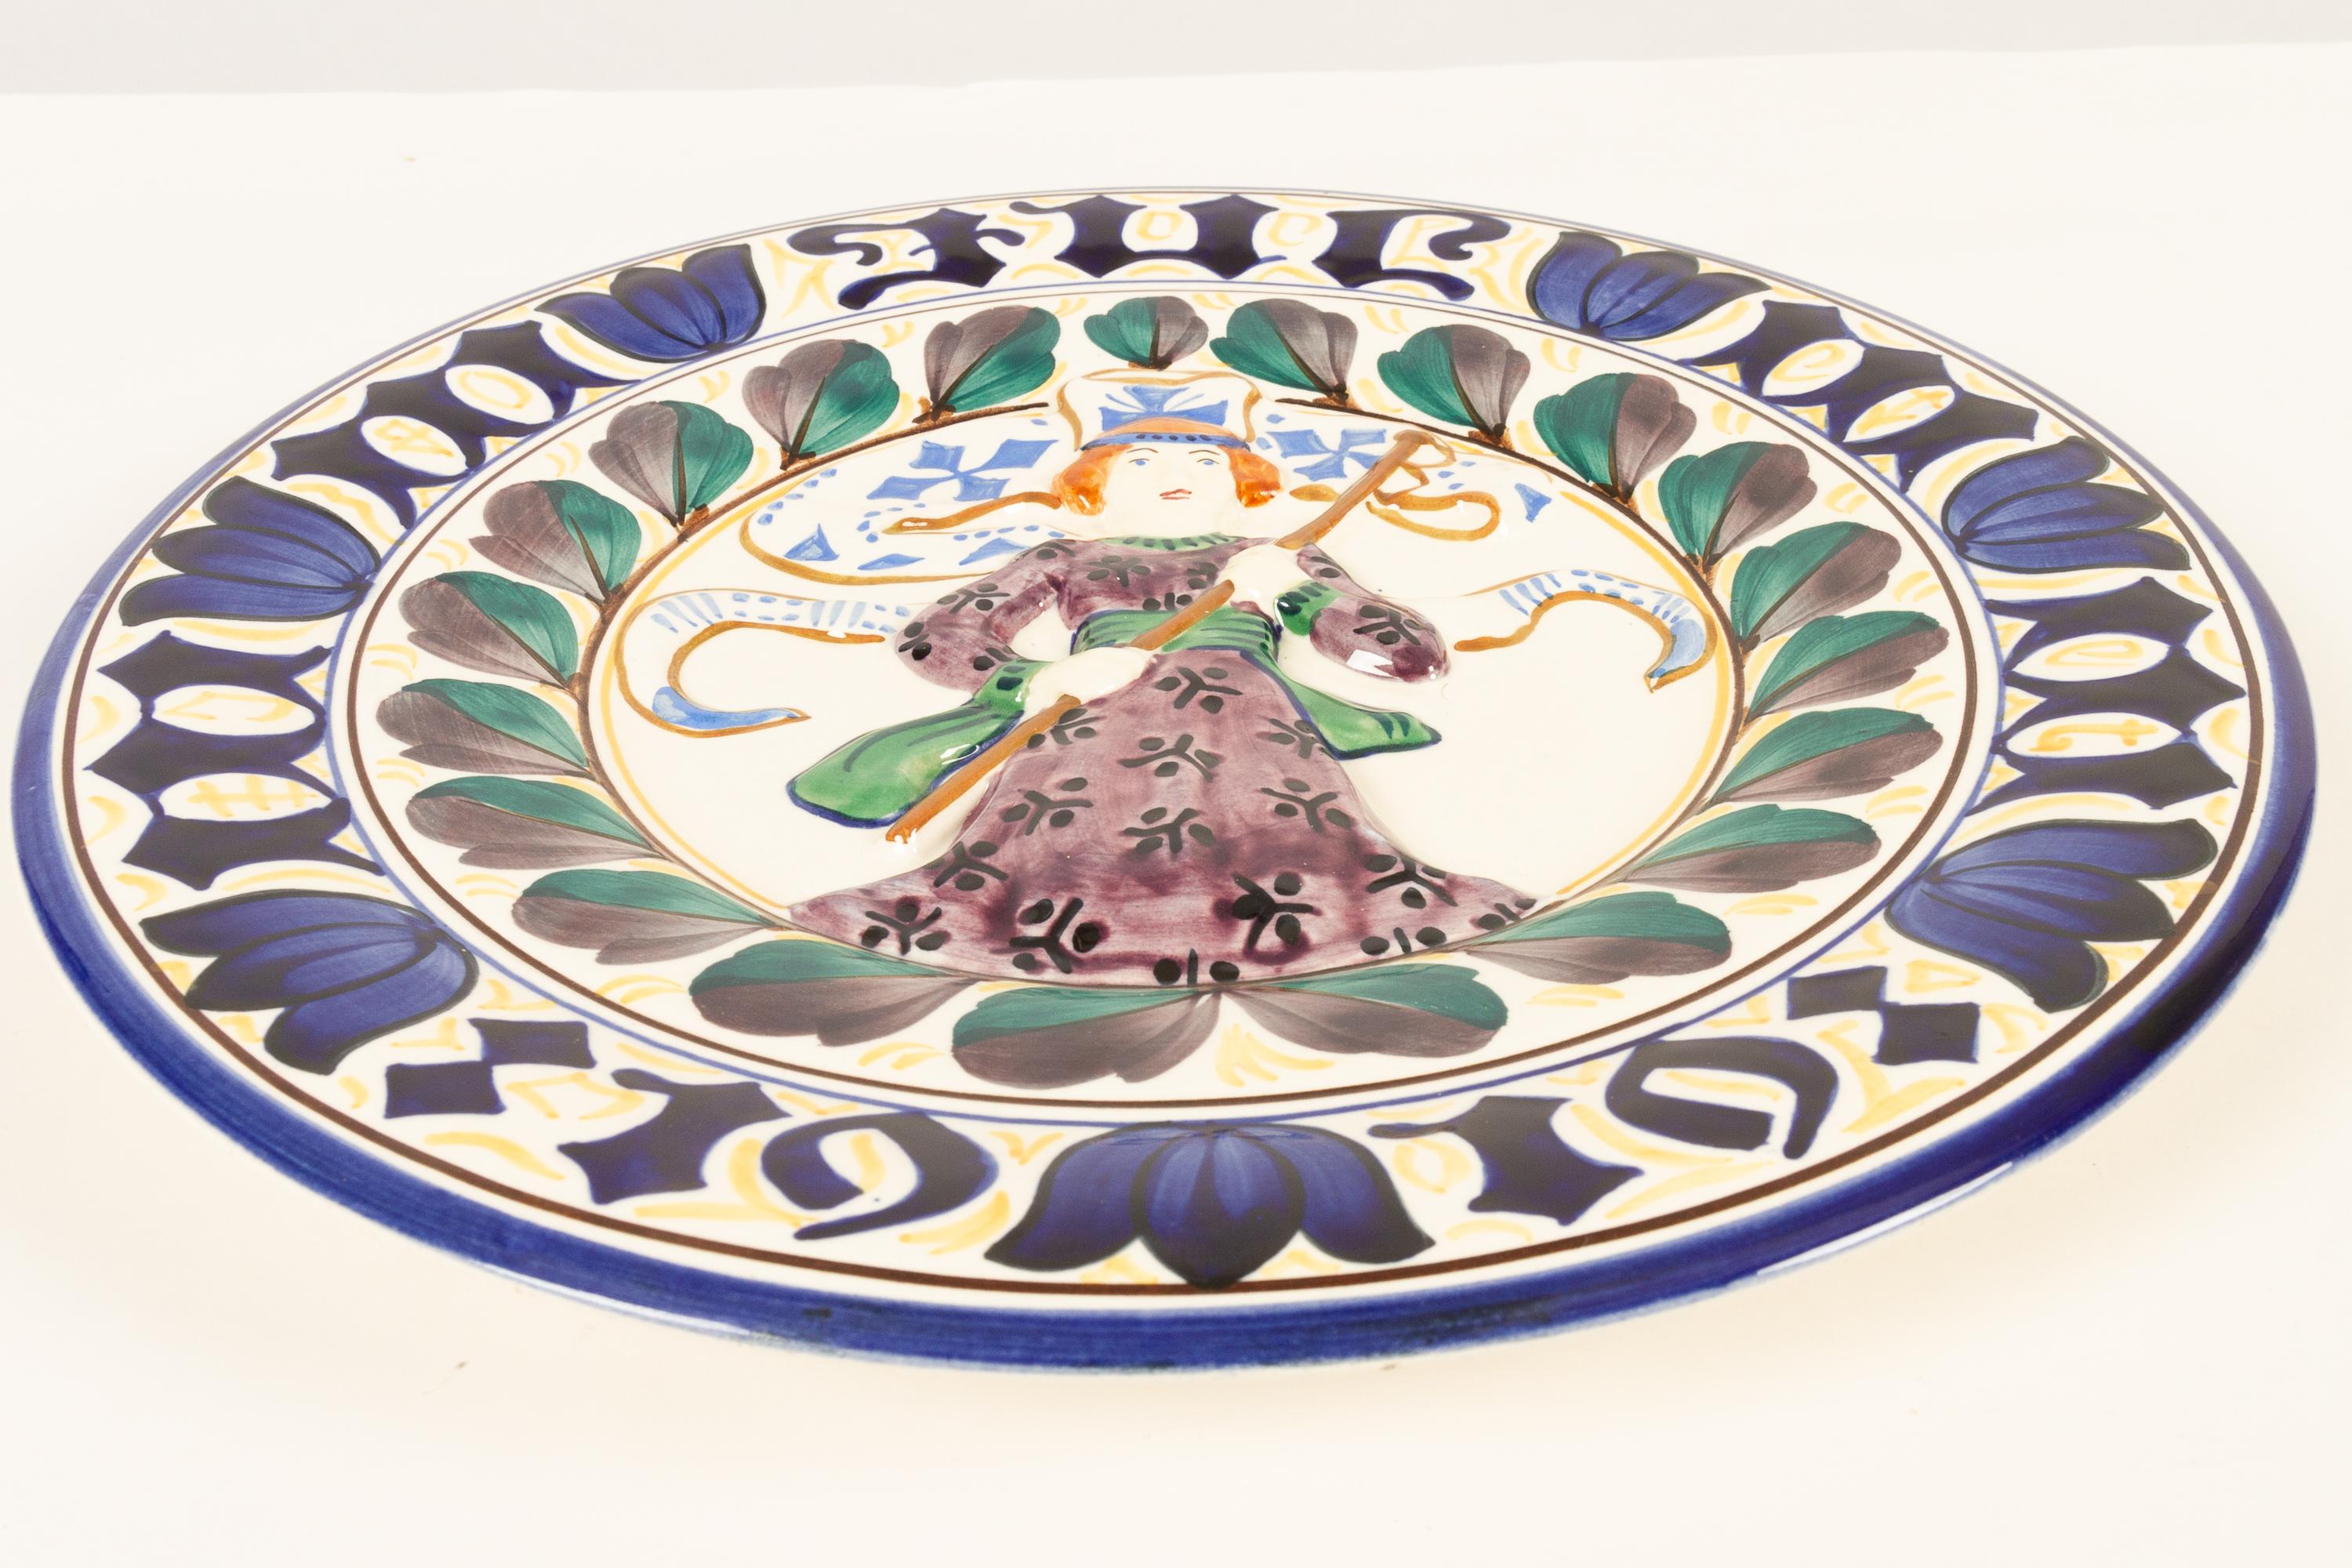 Antique Danish Christmas porcelain decorative plate by Aluminia, 1919.
Large Christmas plate by Aluminia (later Royal Copenhagen) in hand painted faience. The word 